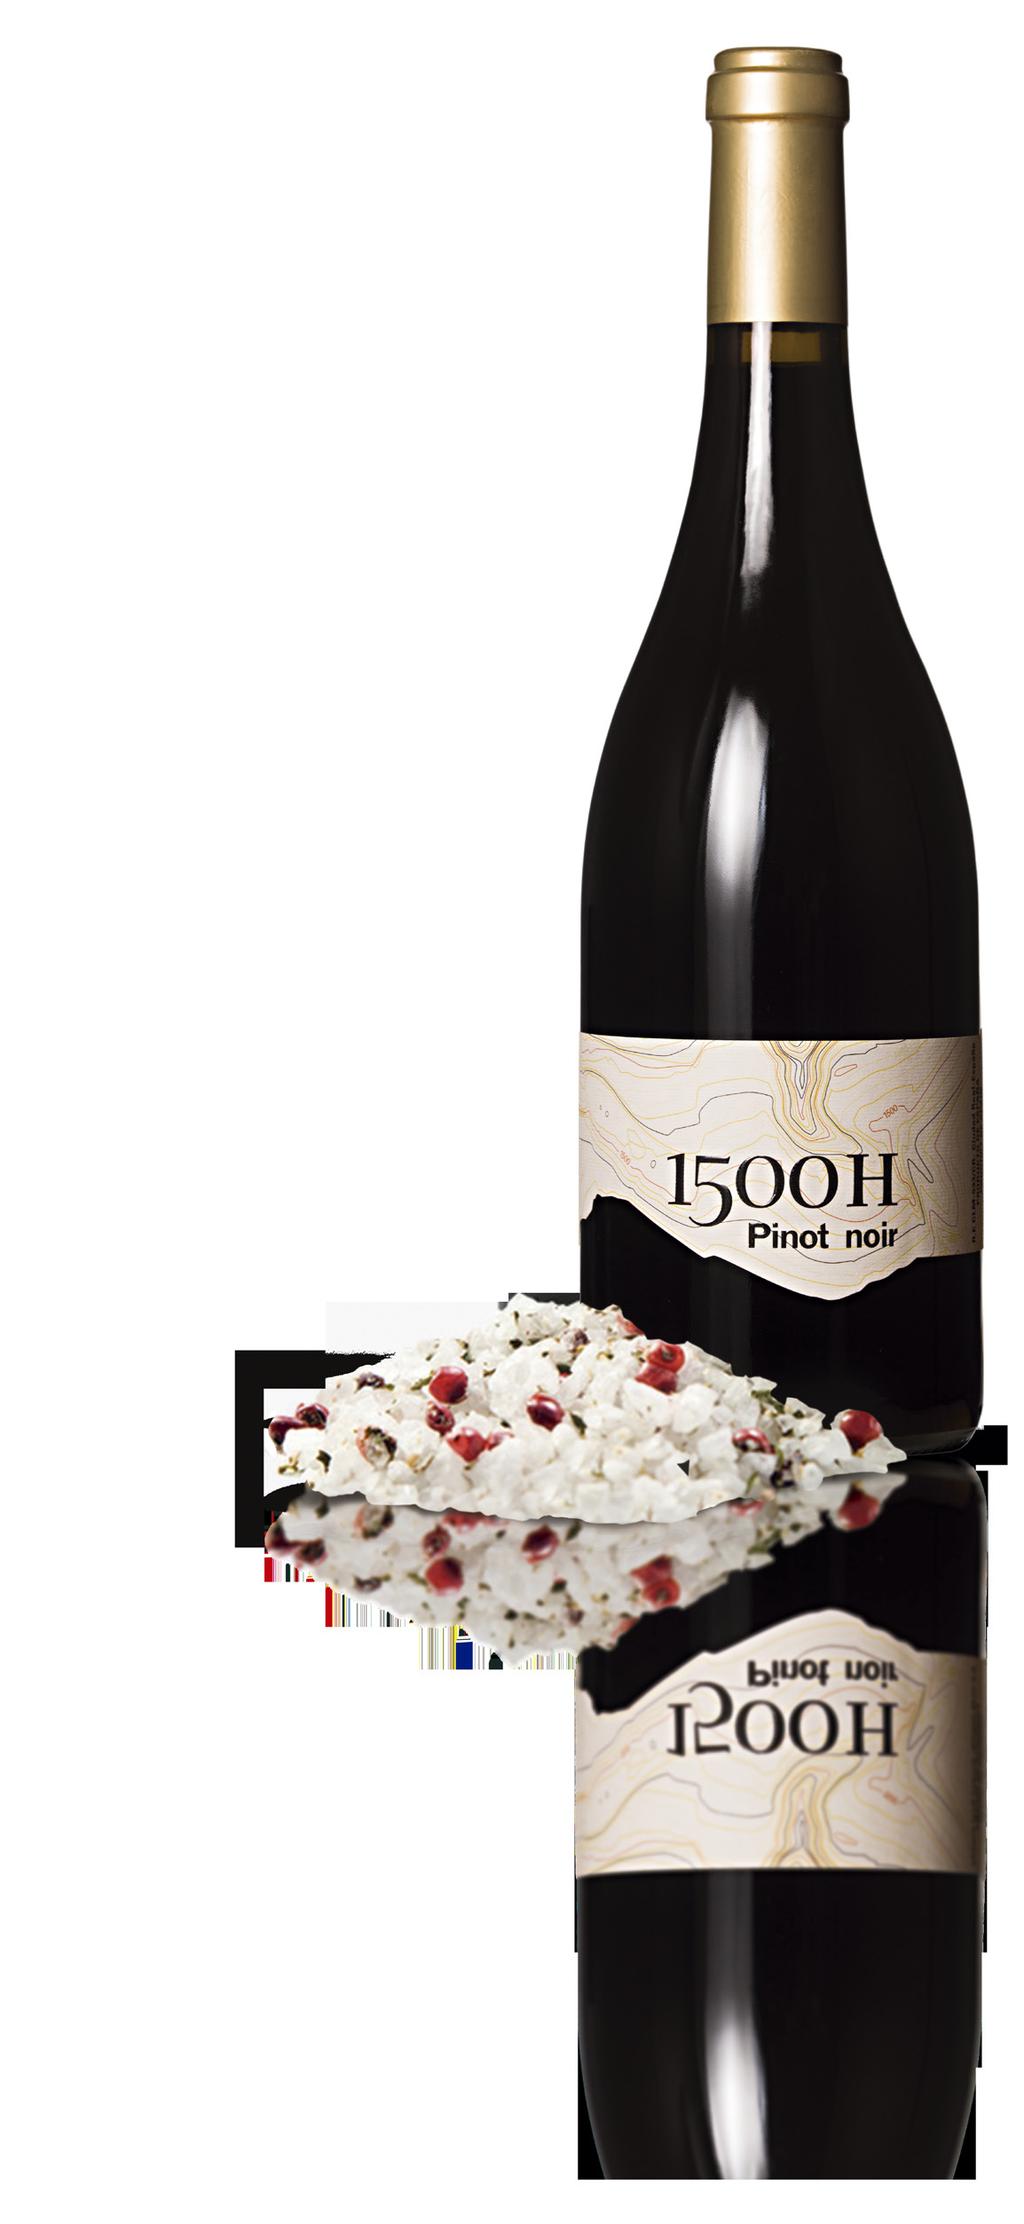 ALPUJARRAS 1500 H PINOT NOIR (100% Pinot noir) 1500 H Pinot noir has been elaborated from grapes which come from a plot of 2,2 Ha, in a vineyard located in the town of Fondón at an altitude of 1500